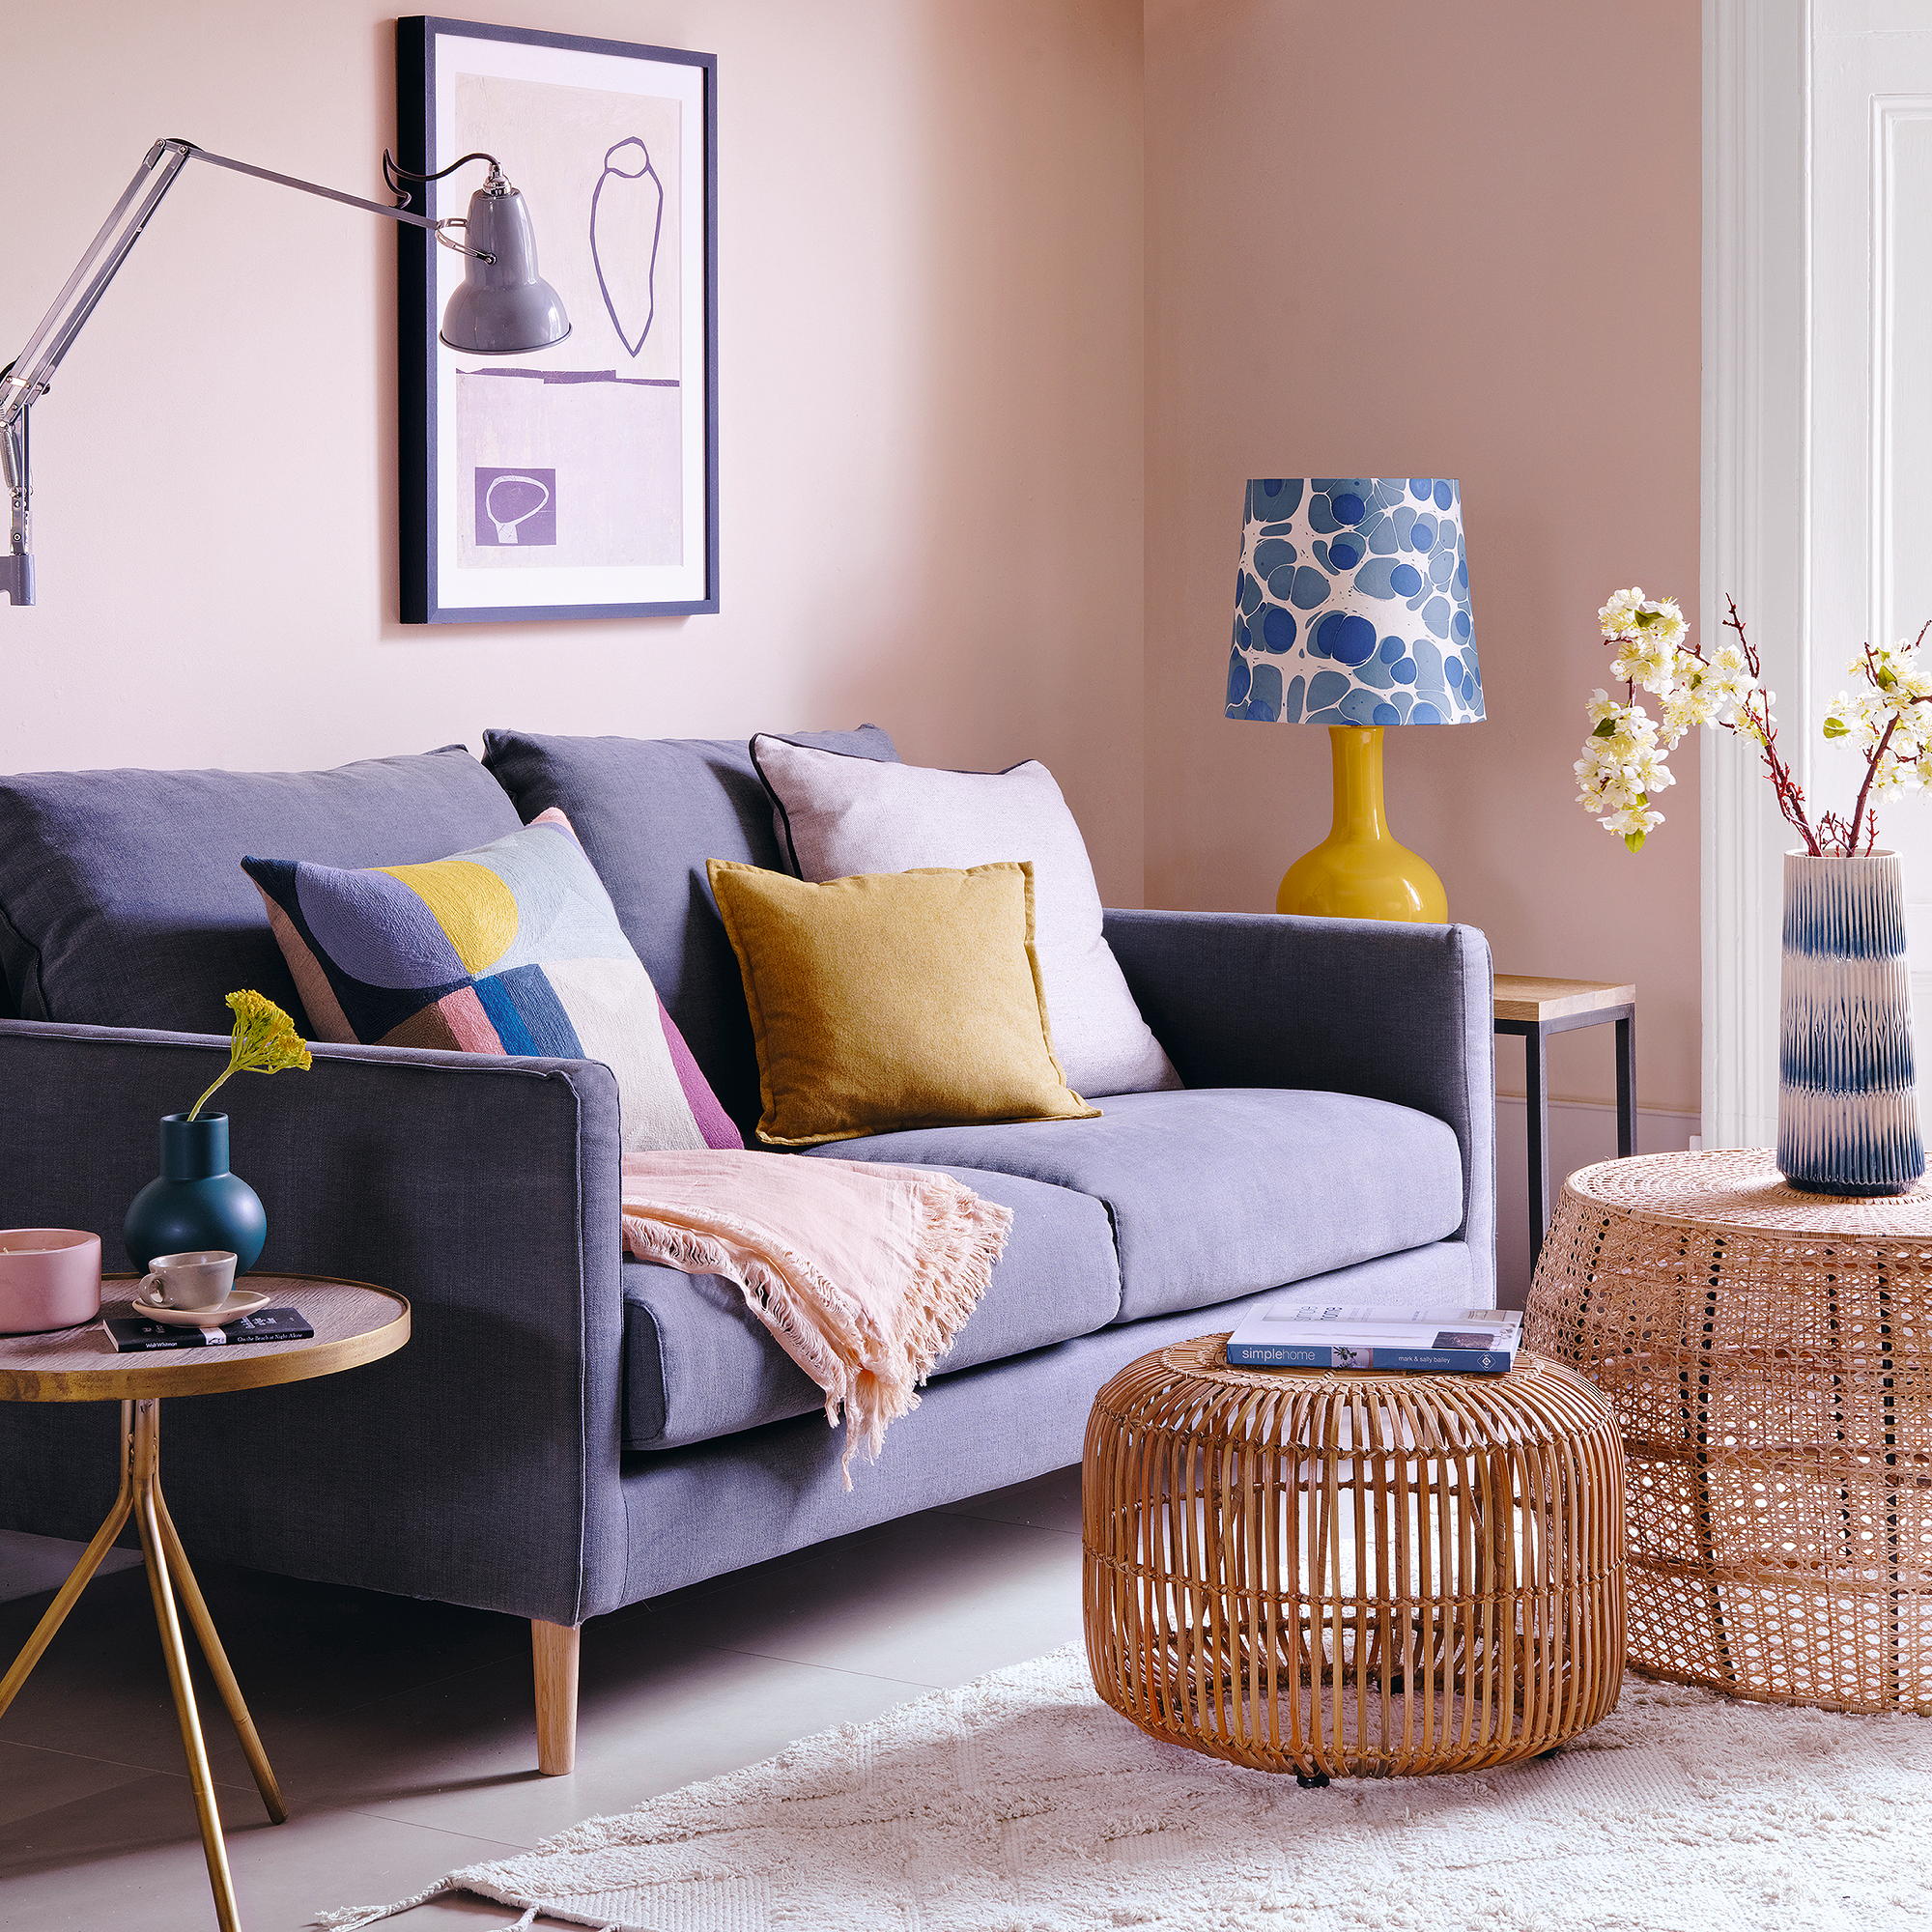 How to Choose the Best Sofa Color for Your Living Room - Urban Ladder